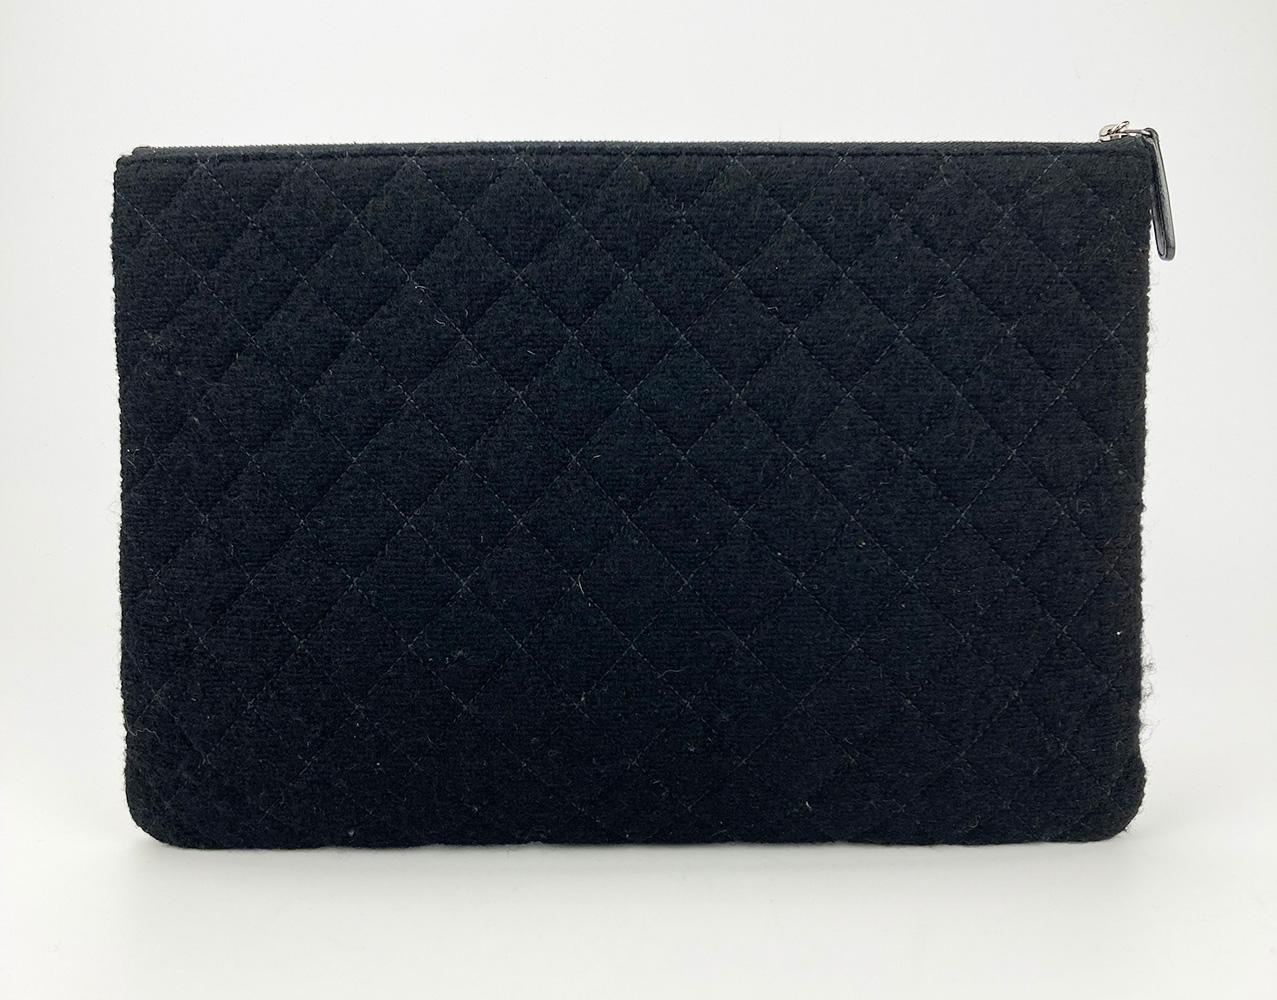 Chanel Tweed and Wool Zipped Pouch in NWOT condition. Multi color quilted tweed and wool exterior trimmed with a delicate gunmetal floral charm and CC logo along front side. Top zip closure opens to a black quilted soft nylon interior. Like new